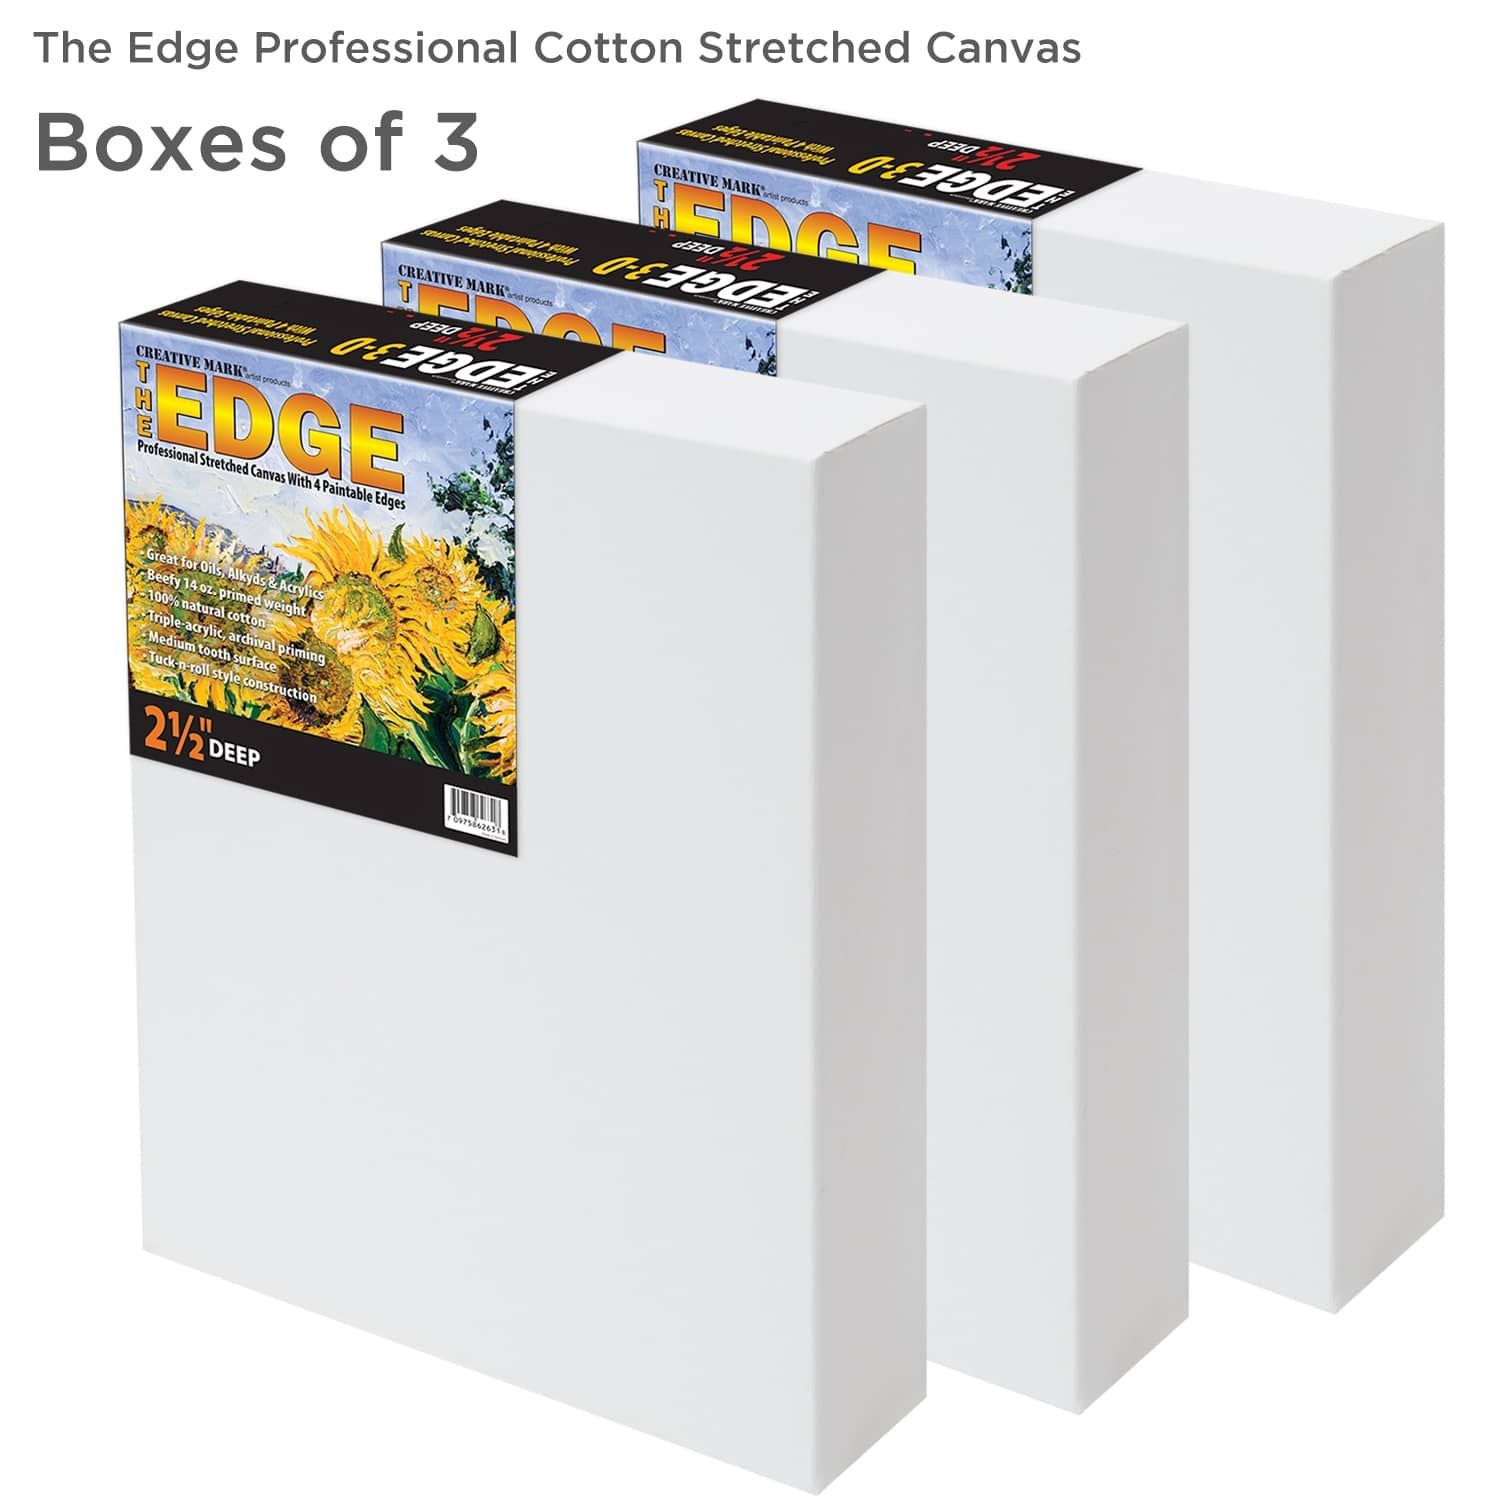 The Edge All Media Cotton Canvas - 2-1/2" Deep Boxes of 3